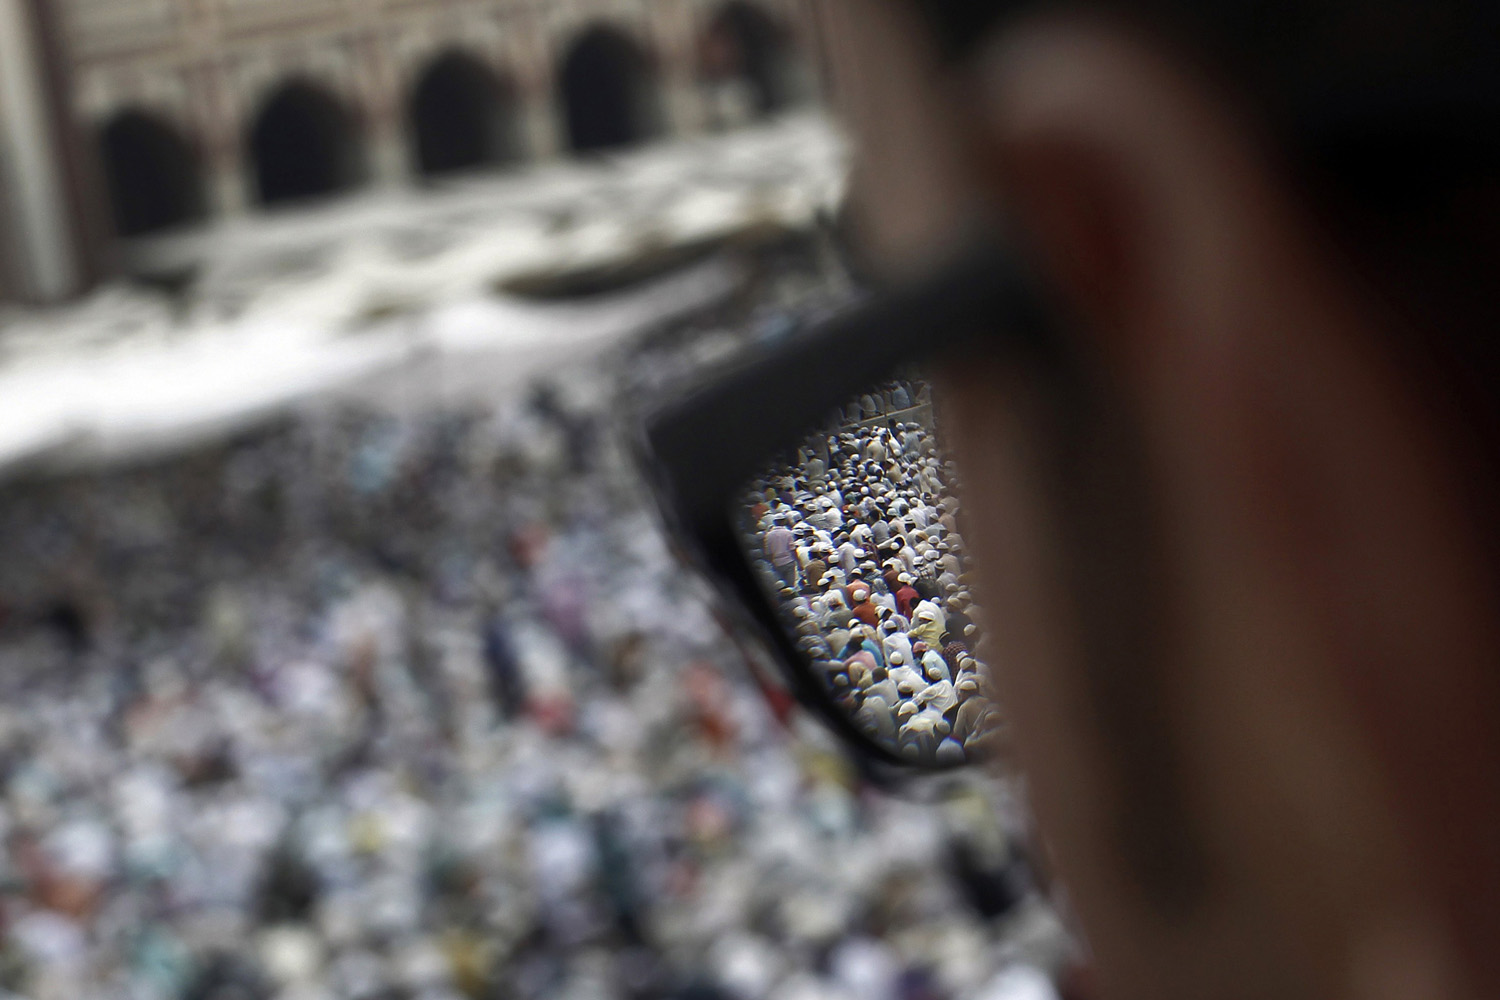 Aug. 17, 2012. Muslims offering last Friday prayers are seen through the spectacles of a man at the Jama Masjid (Grand Mosque) before Eid-al-Fitr in the old quarters of Delhi.